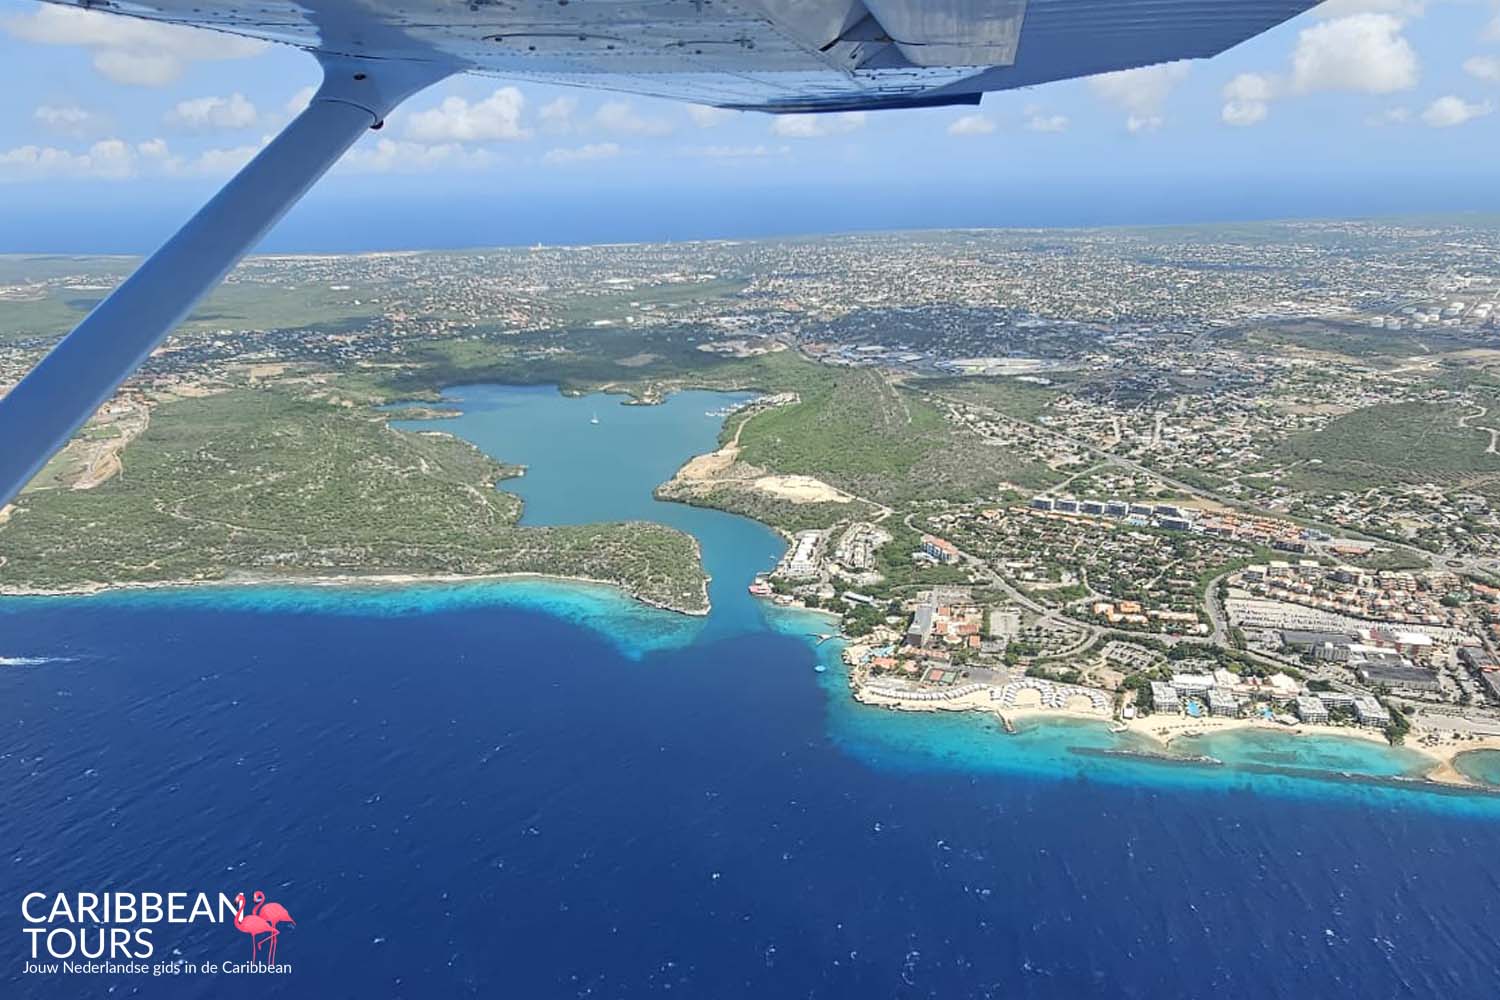 Rondvlucht over Curacao